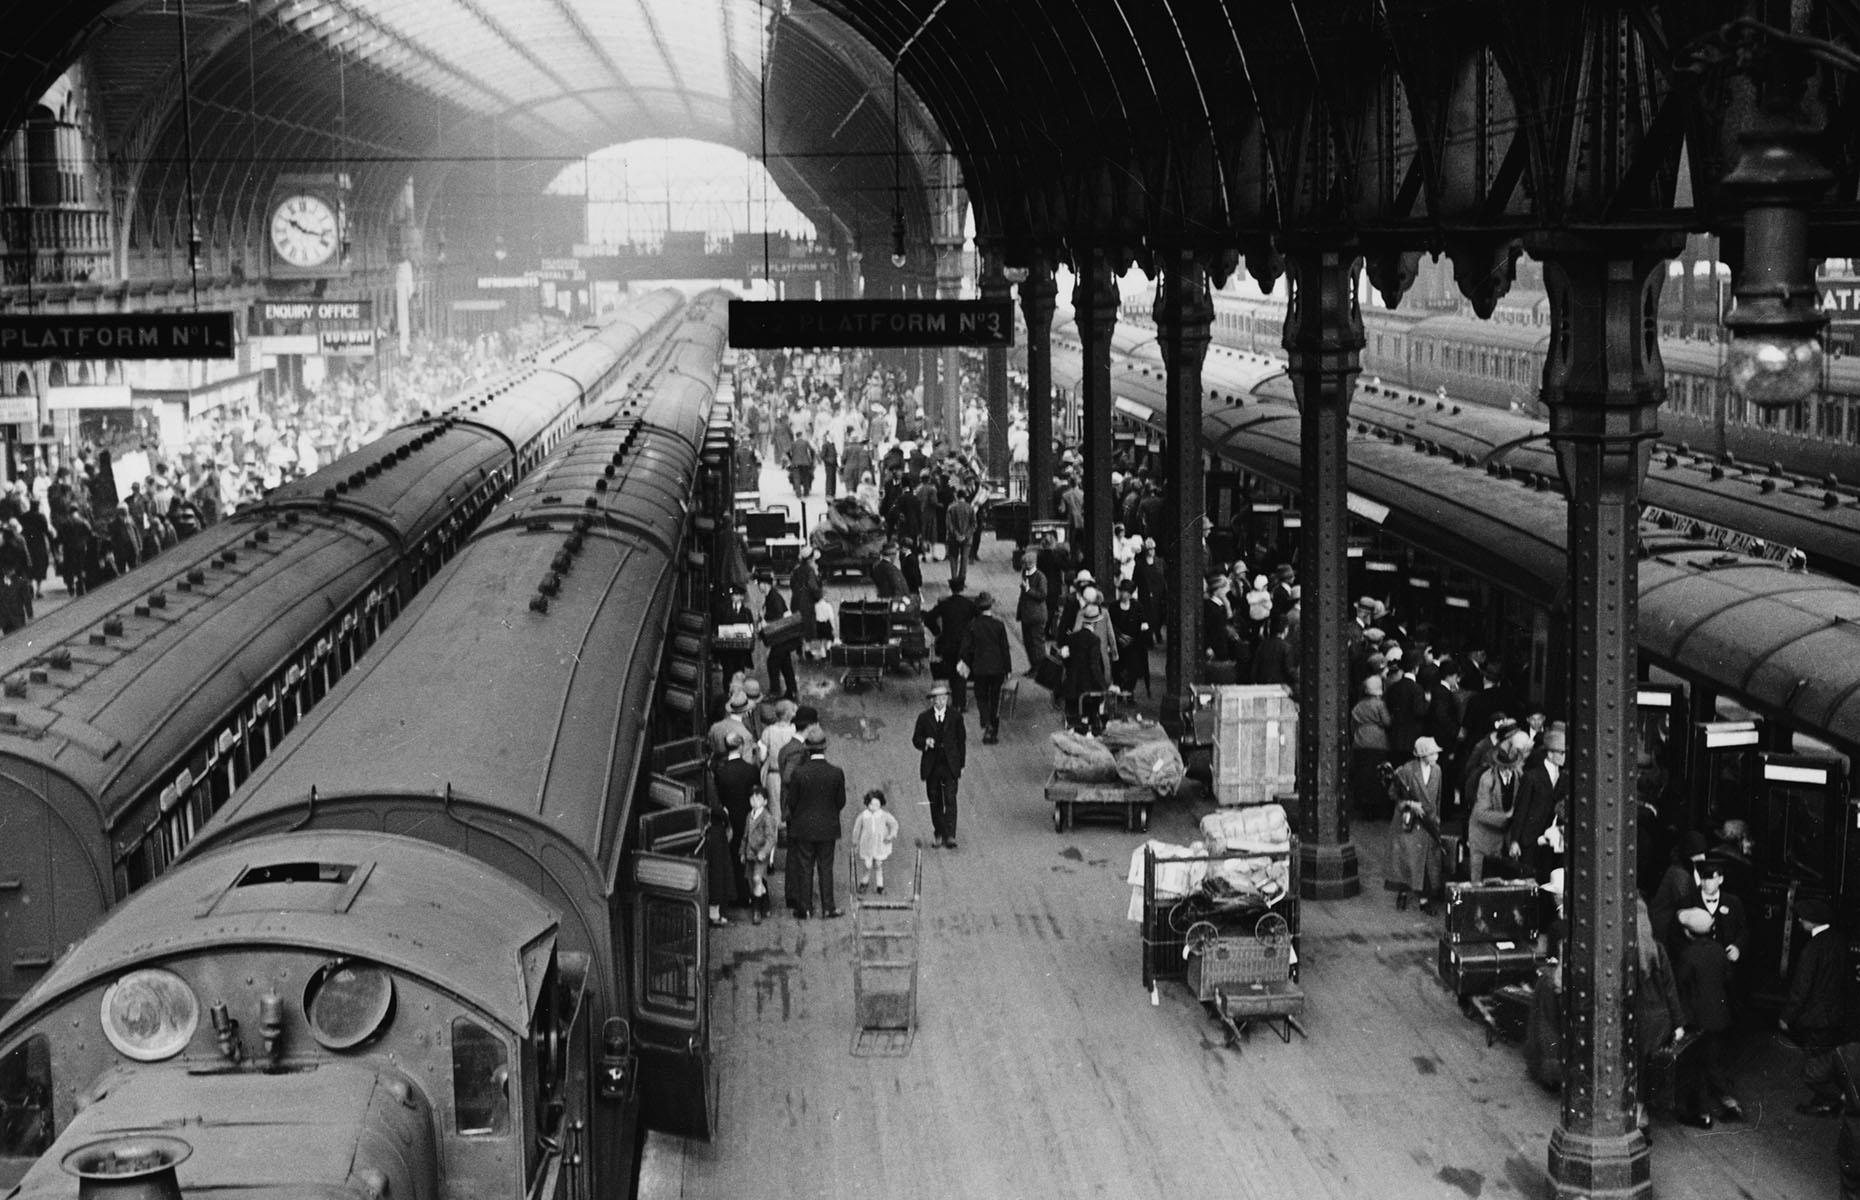 <p>As summer arrived, Paddington Station in London in June 1926 looked no different to how Stansted Airport does today before holiday season. Crowds are pictured waiting to board trains for Cornwall – an especially sough-after holiday destination for Londoners at the time.</p>